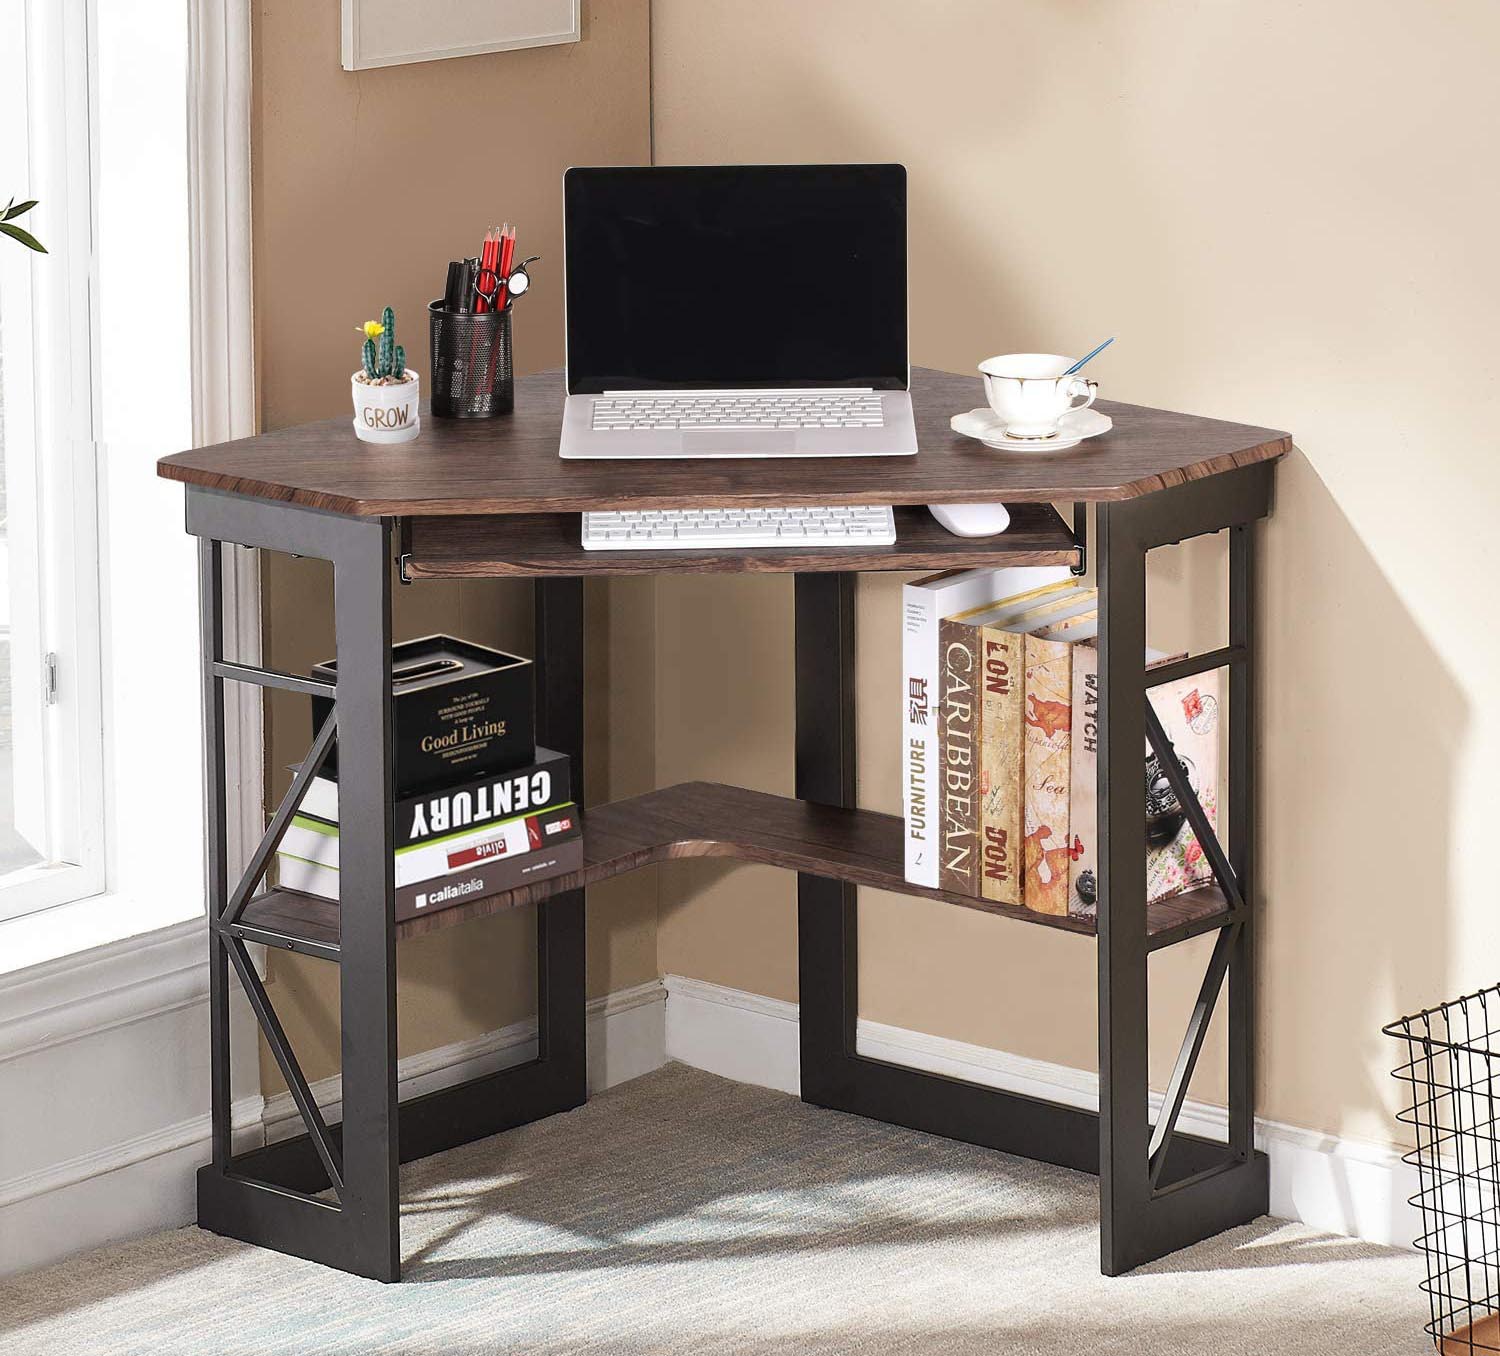 Pieces of Furniture That Will Make Any Room Feel Bigger Option Corner Desk